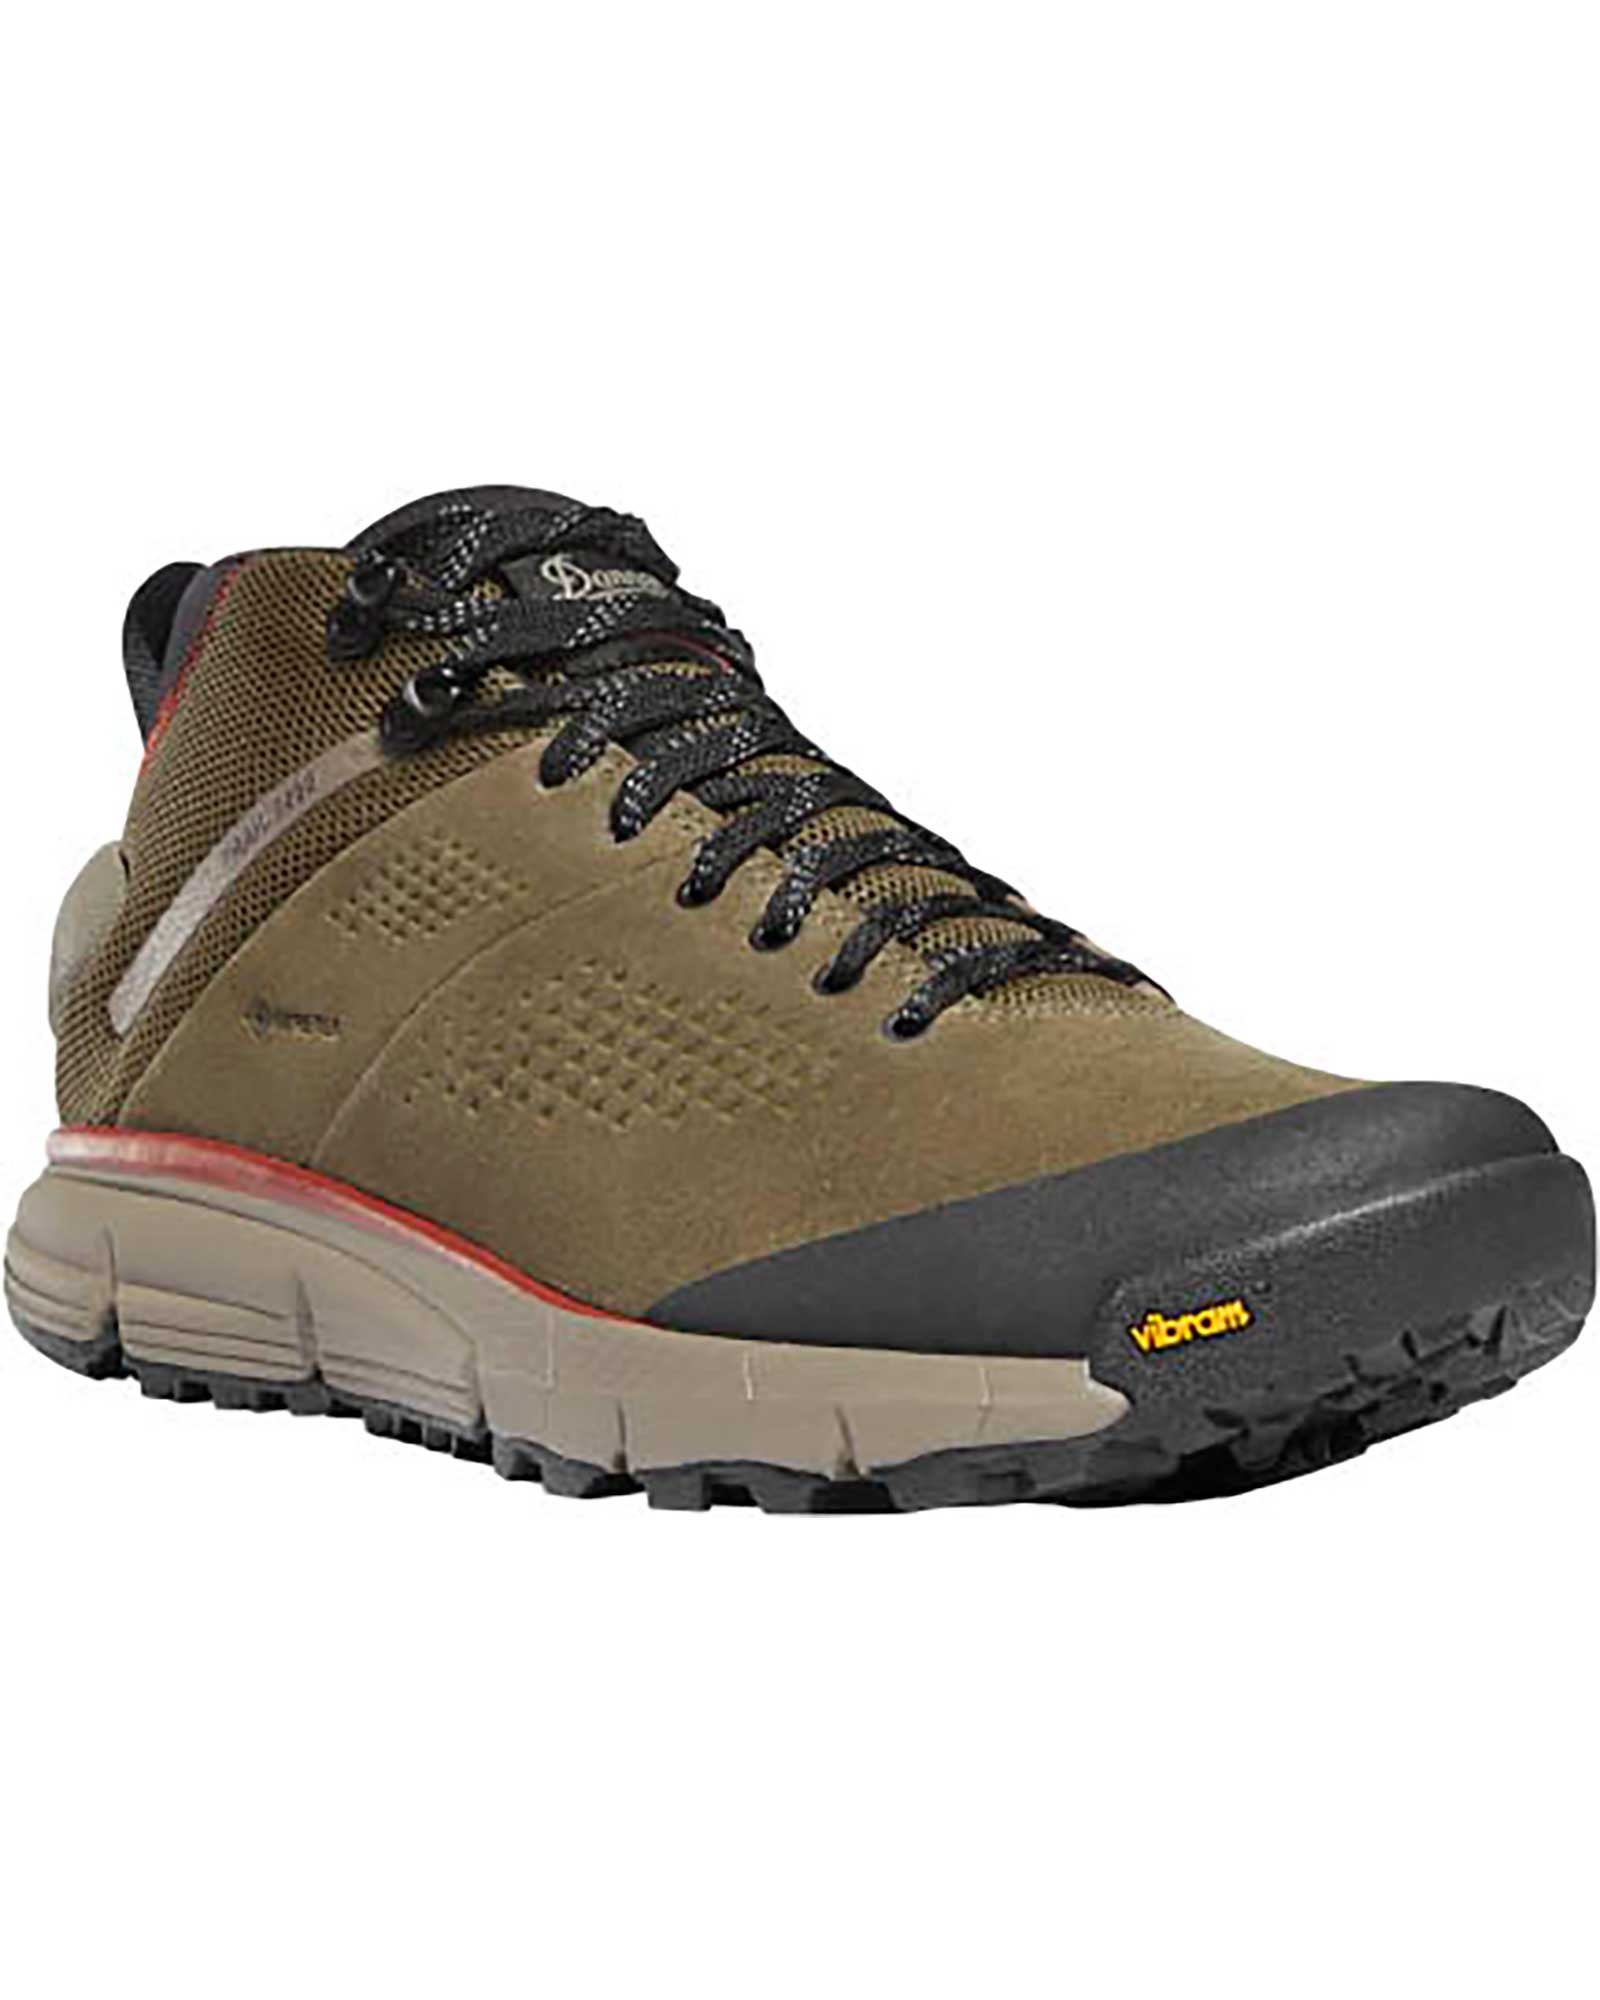 Danner Men’s Trail 2650 Mid GORE TEX Boots - Dusty Olive UK 8